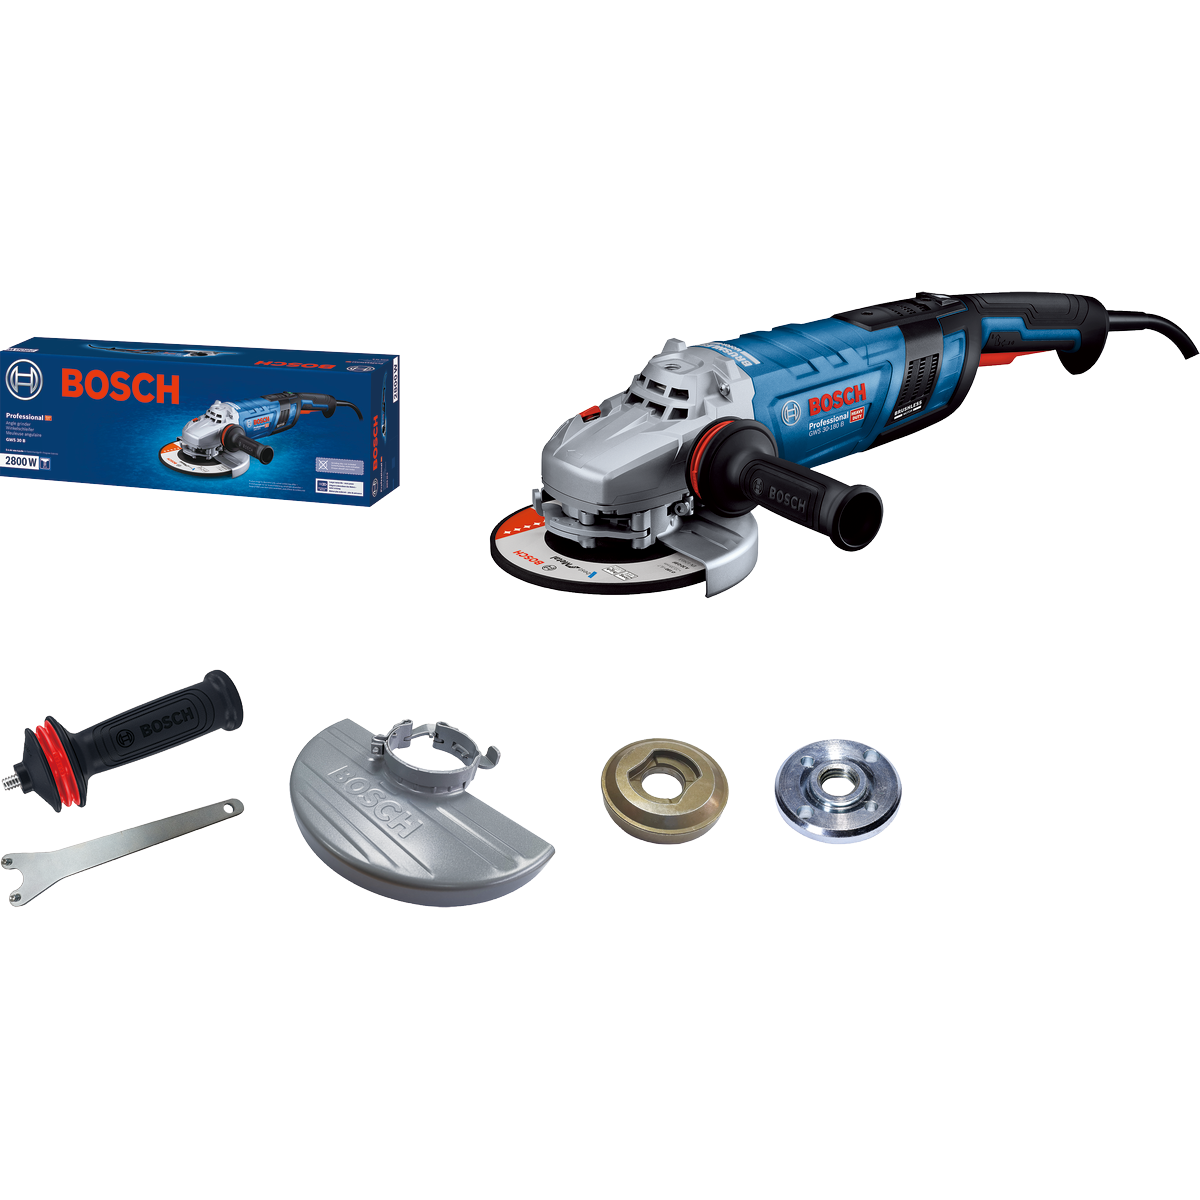 Bosch Professional Angle Grinder GWS 30-180 PB 06018G0100 Power Tool Services